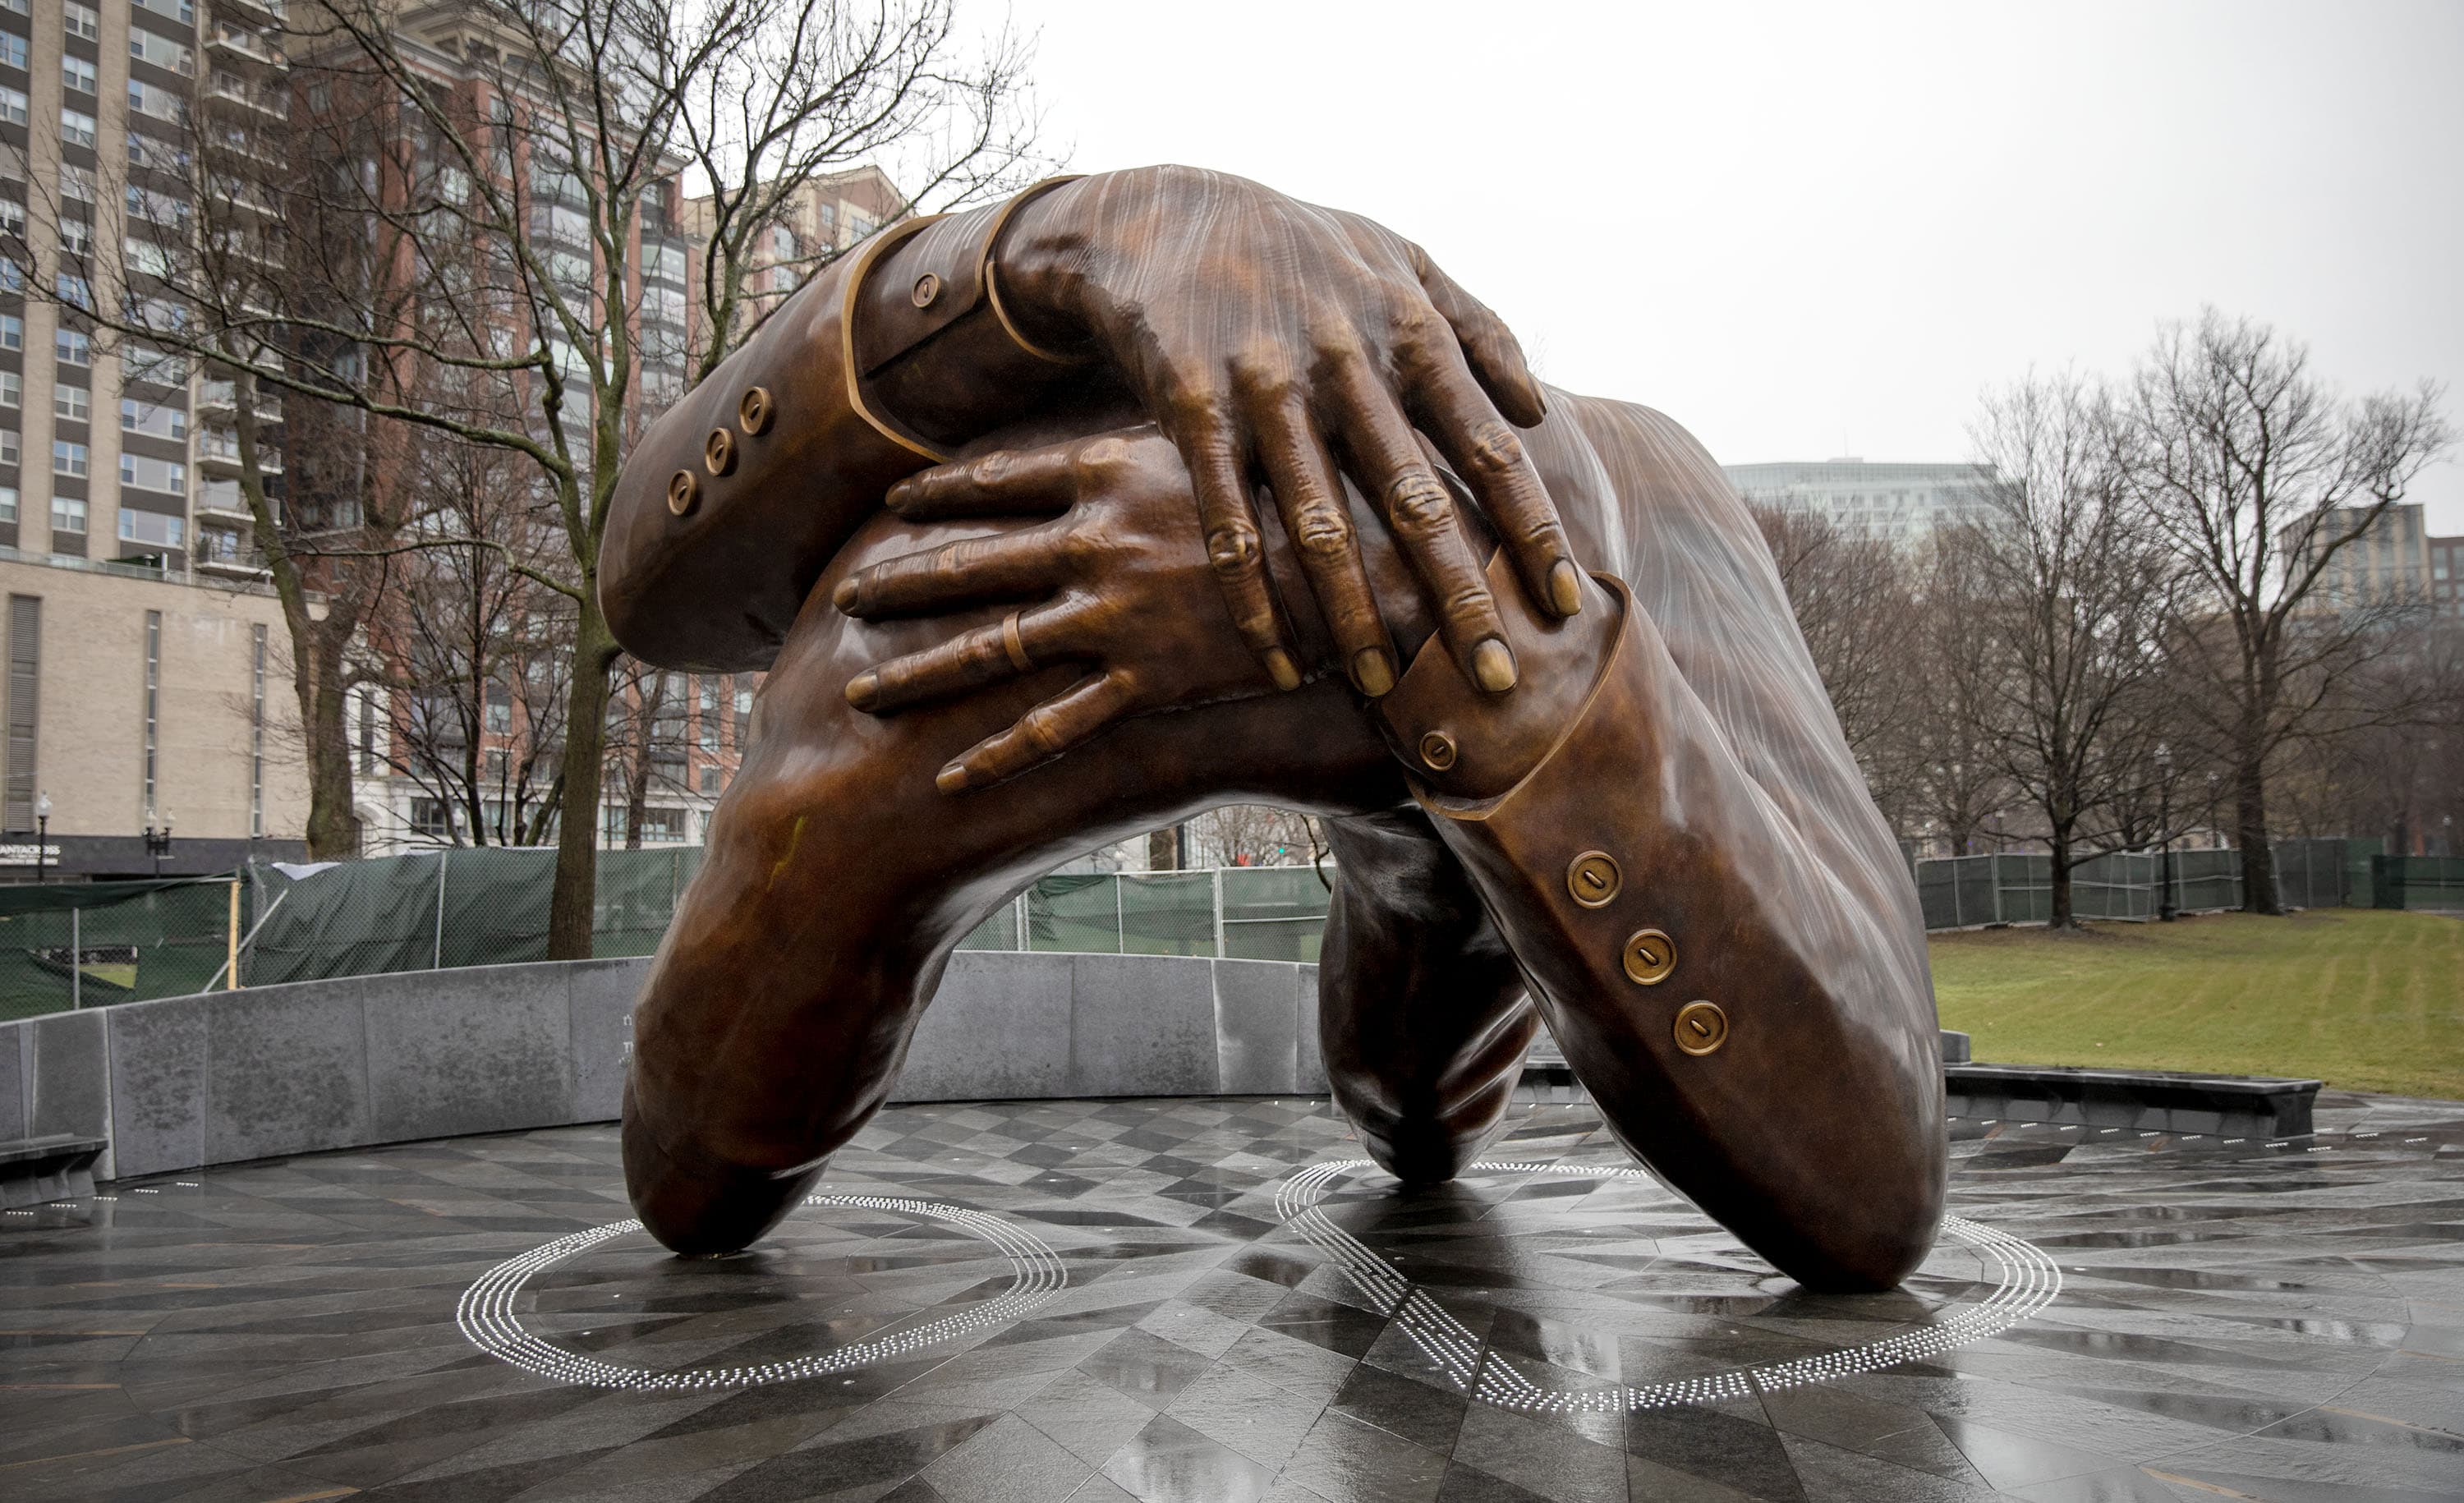 A representation of vulnerability and security': Memorial honoring the Kings opens on Boston Common | WBUR News